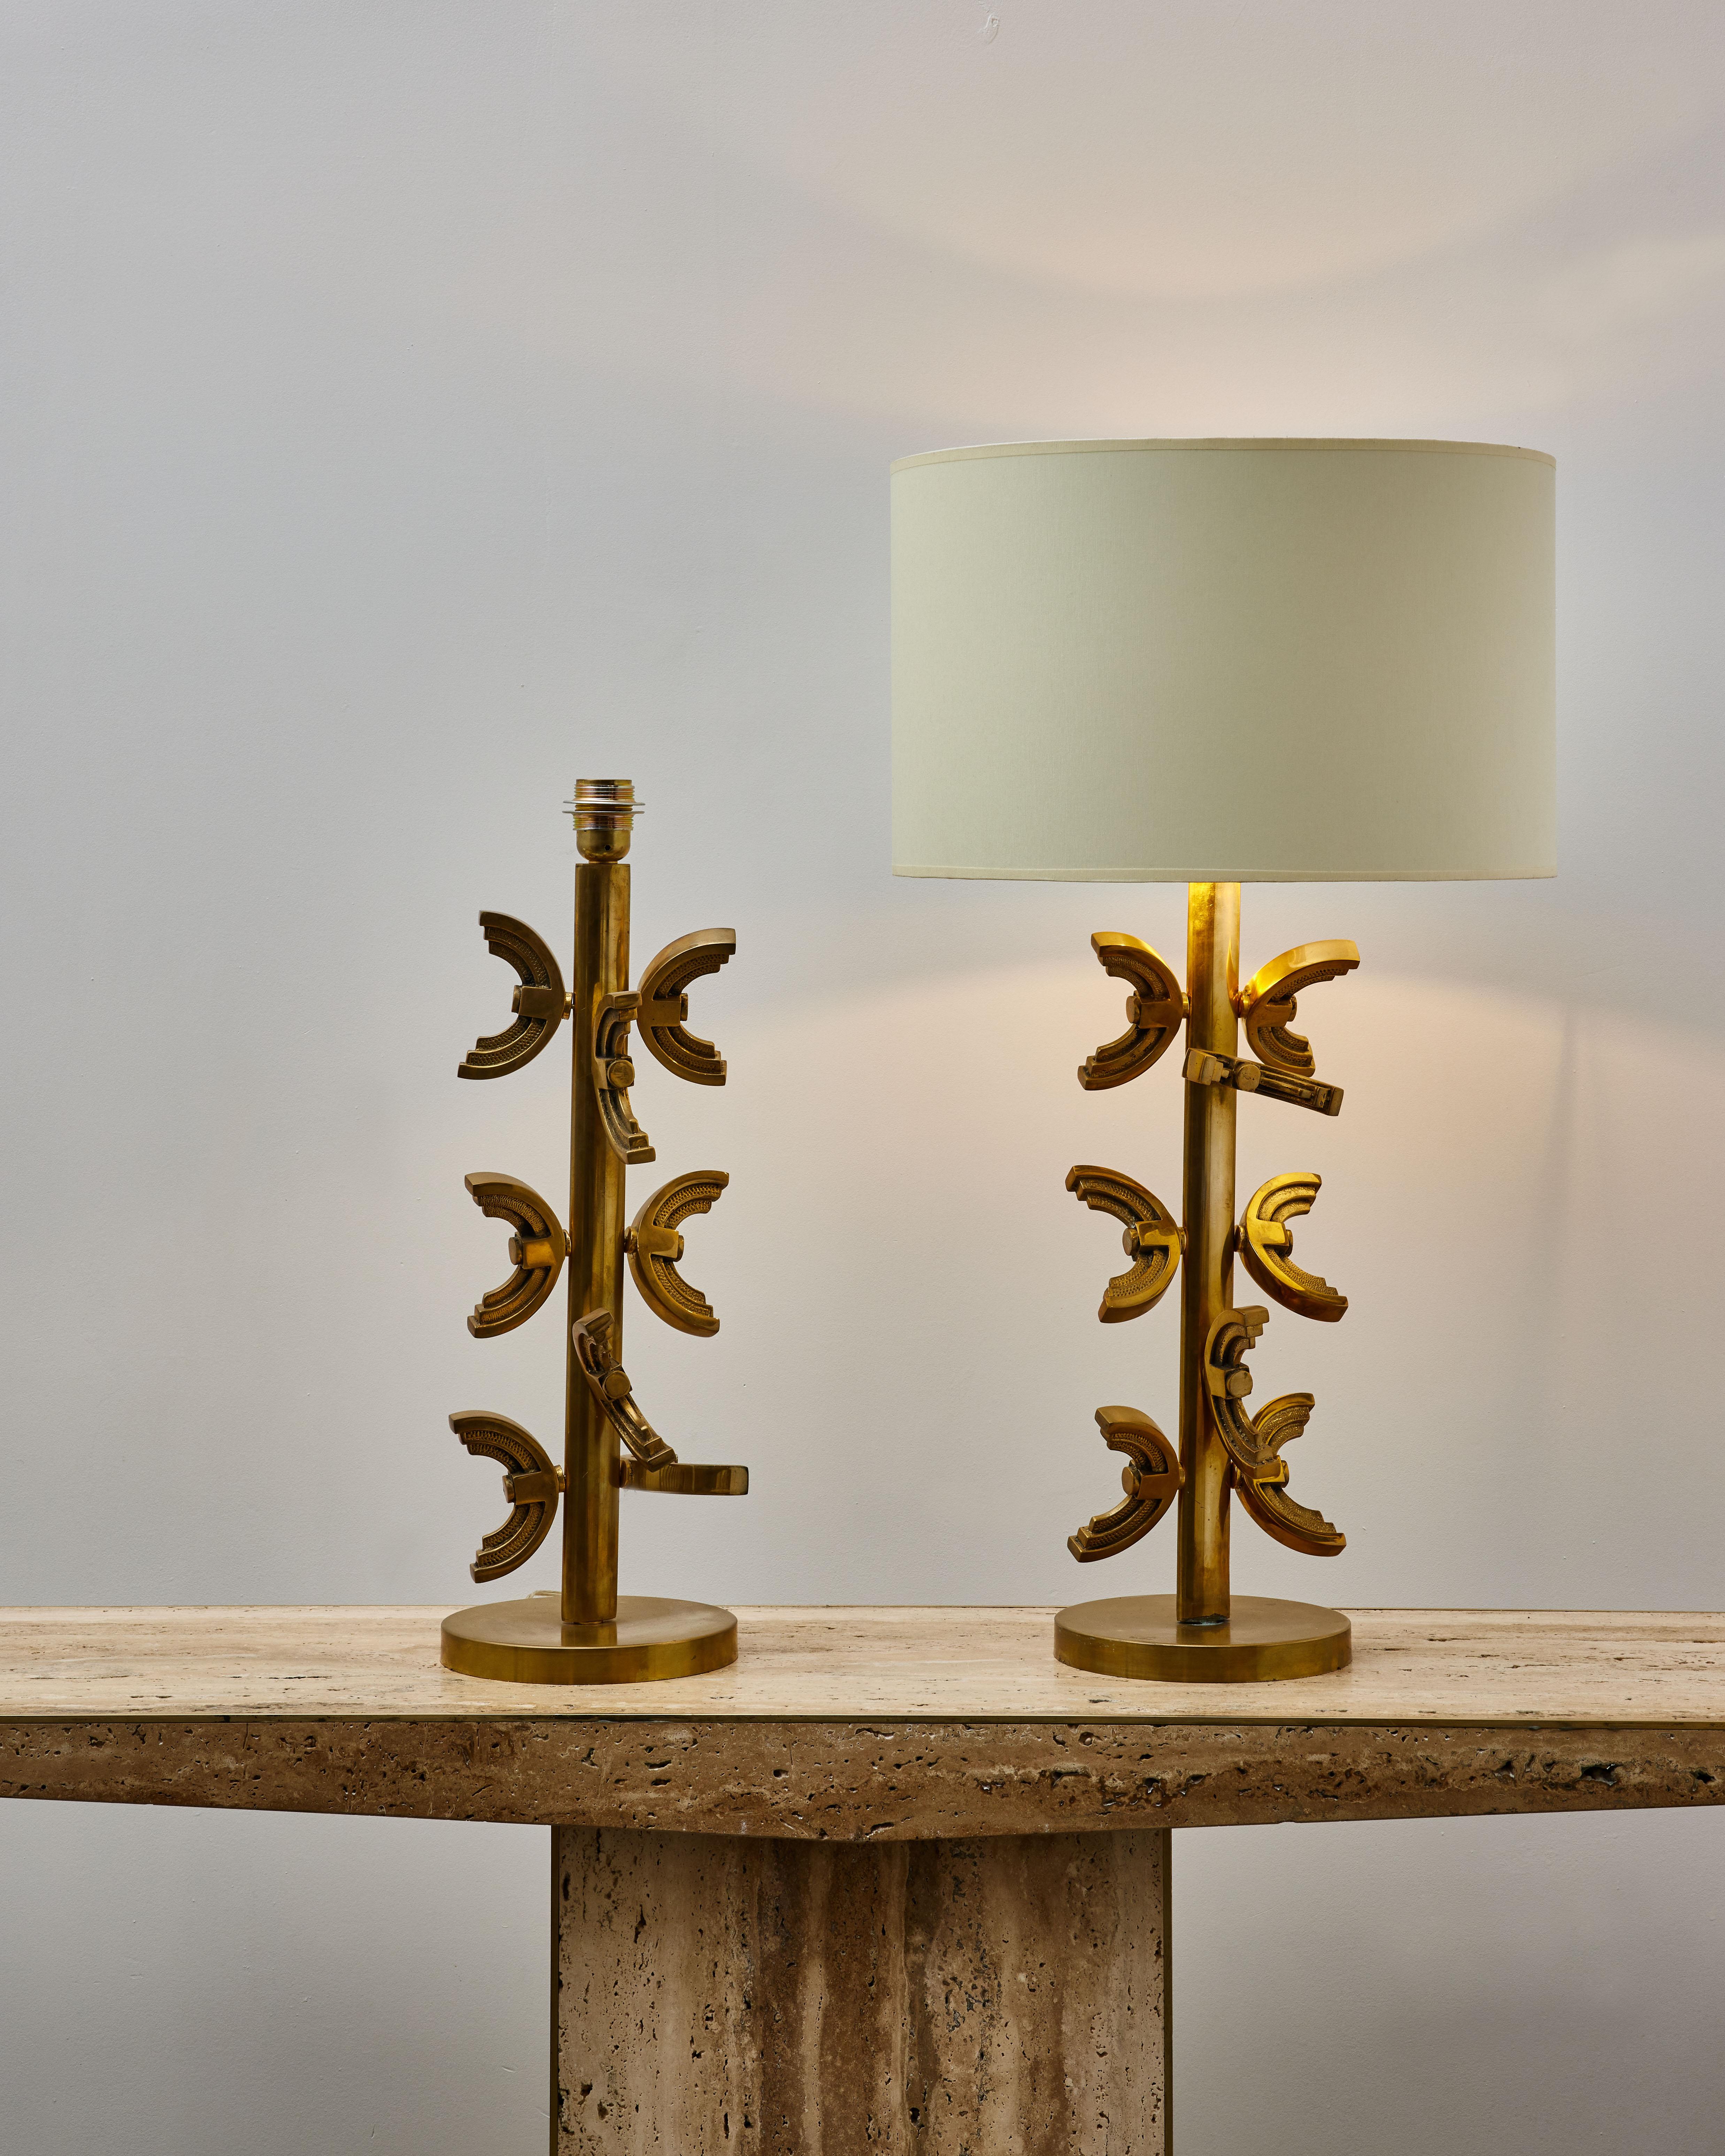 Elegant pair of table lamps in sculpted and patinated brass. Rewired.
France, 1980s

Price and dimensions without shades.